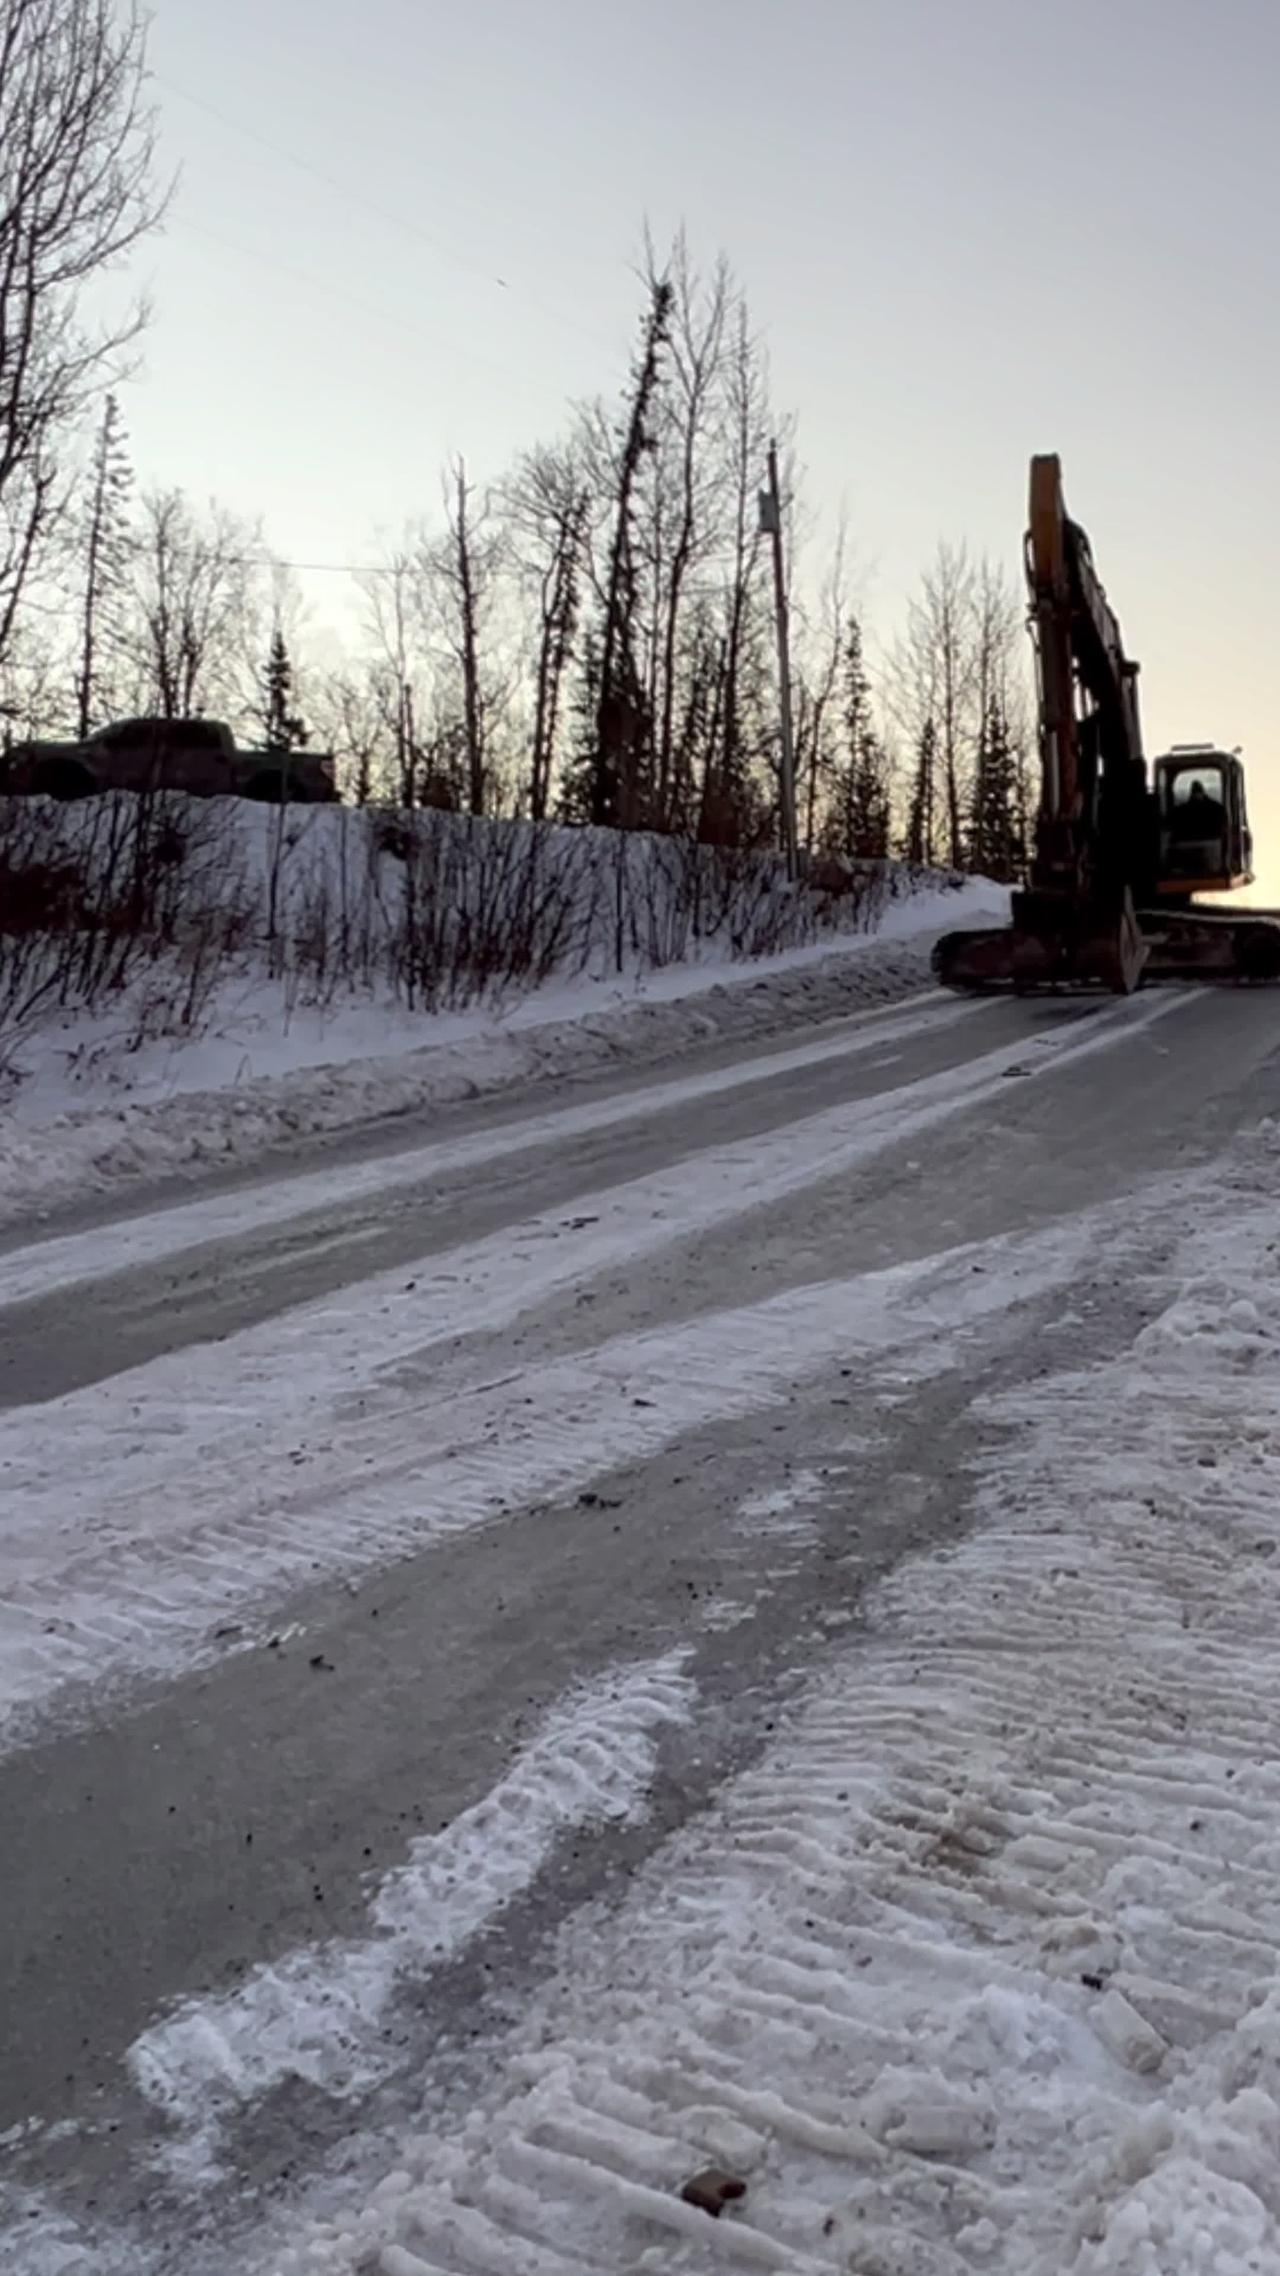 Sliding a Backhoe Down an Icy Road